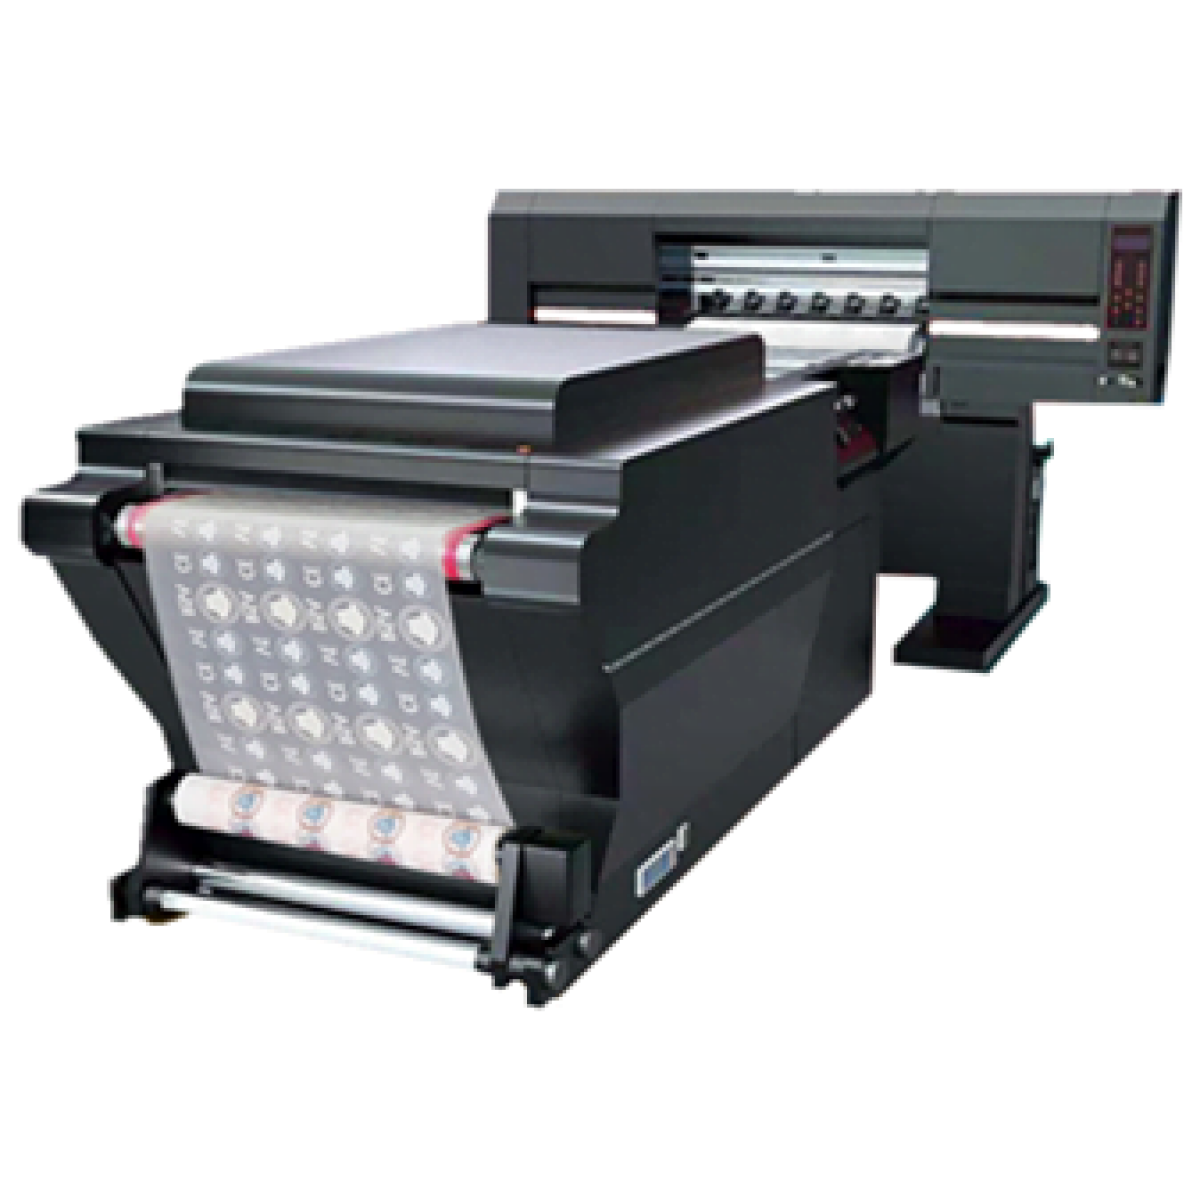 Direct To Transfer 4-Head Printer Shaker Dryer STS®